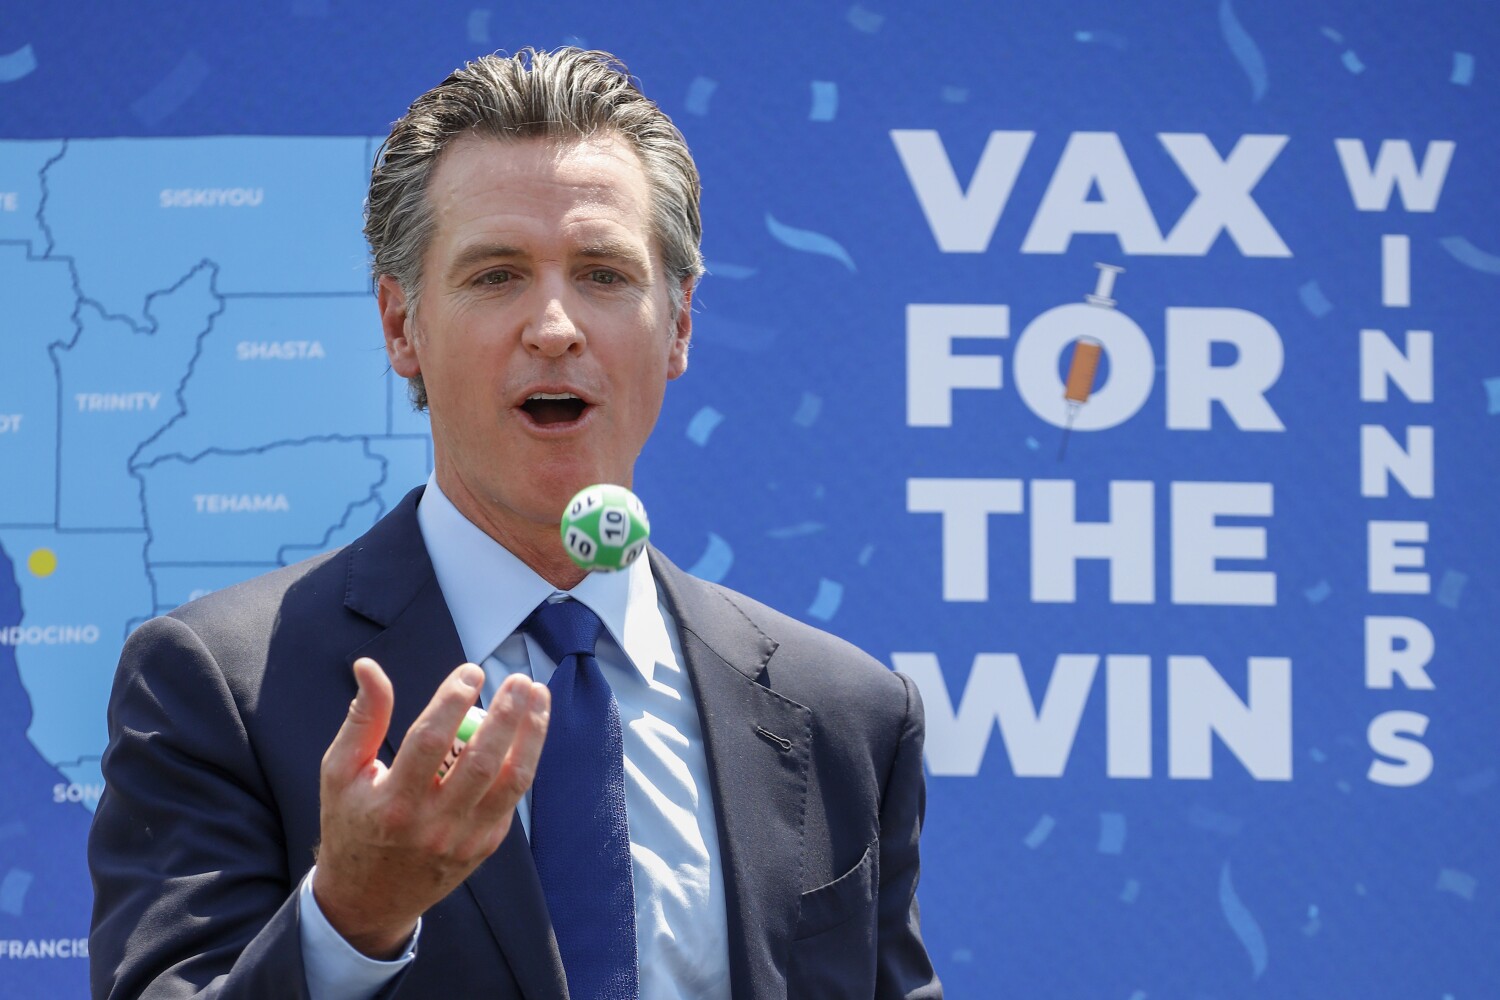 California's COVID-19 vaccinations rise as U.S. struggles. Does the lottery deserve credit?